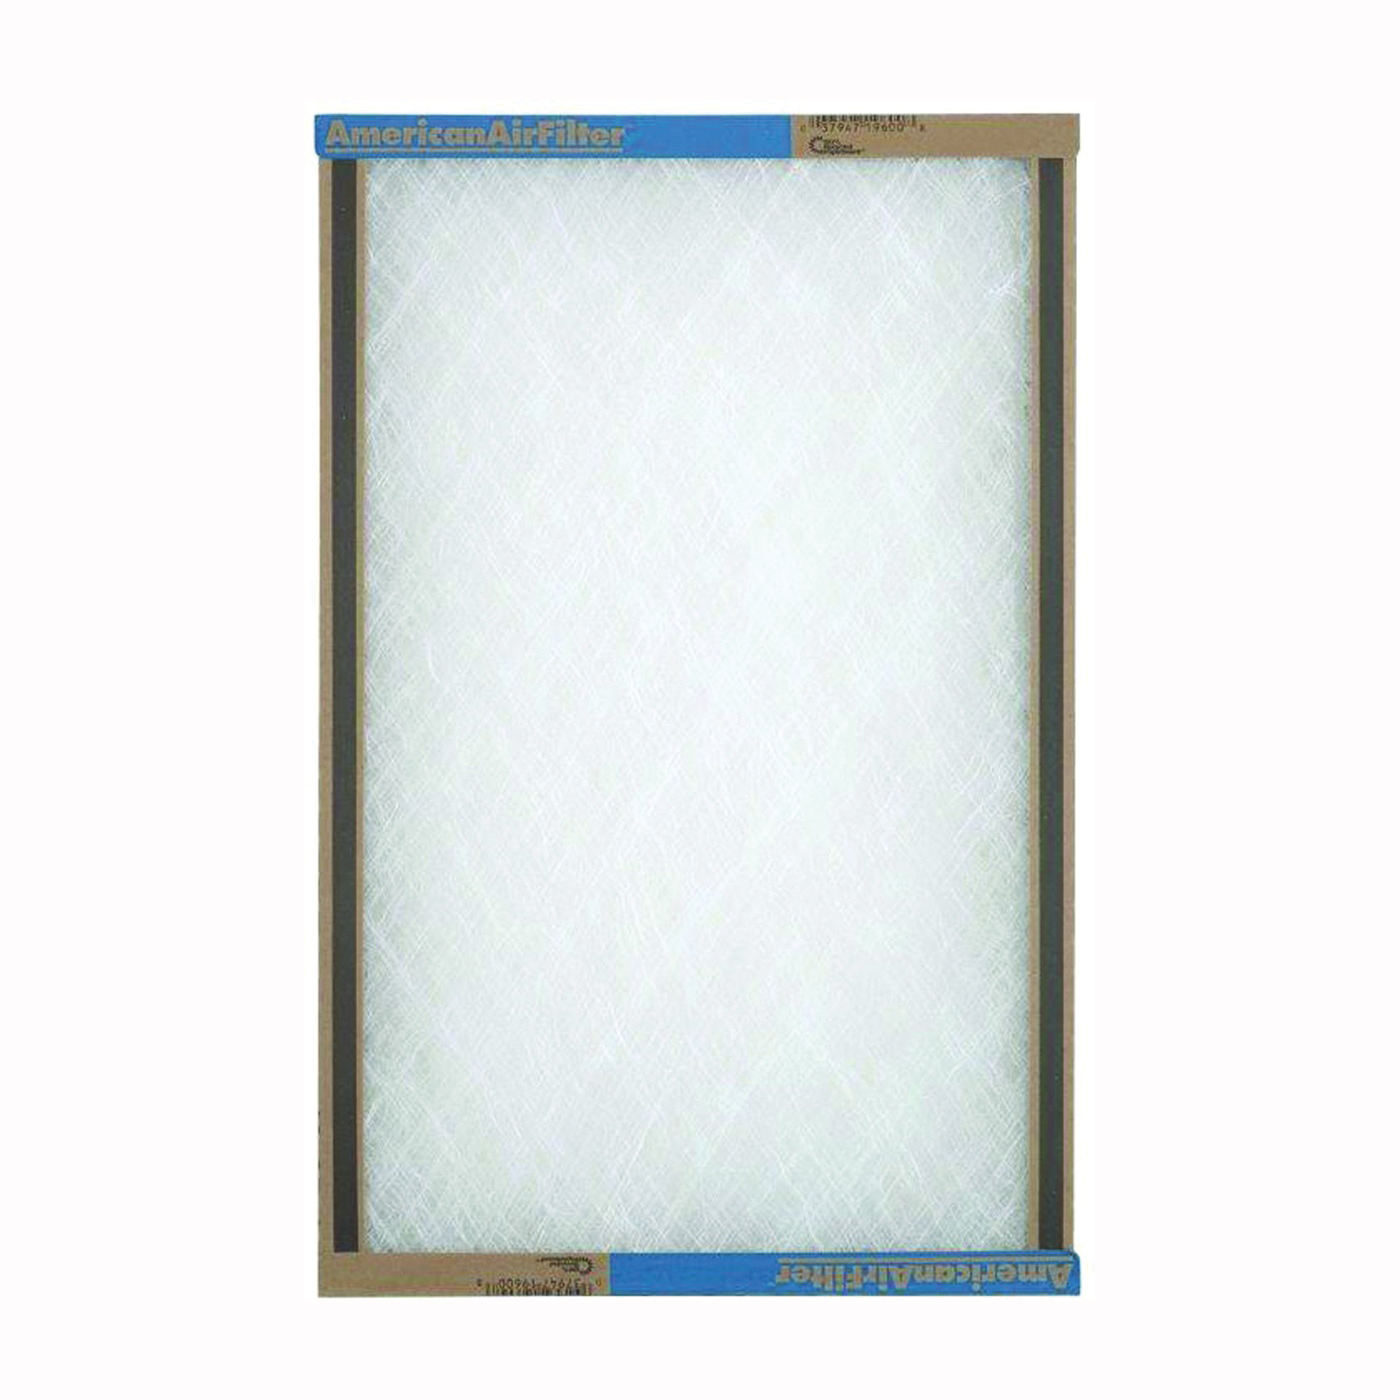 220-800-051 Panel Filter, 25 in L, 20 in W, Chipboard Frame